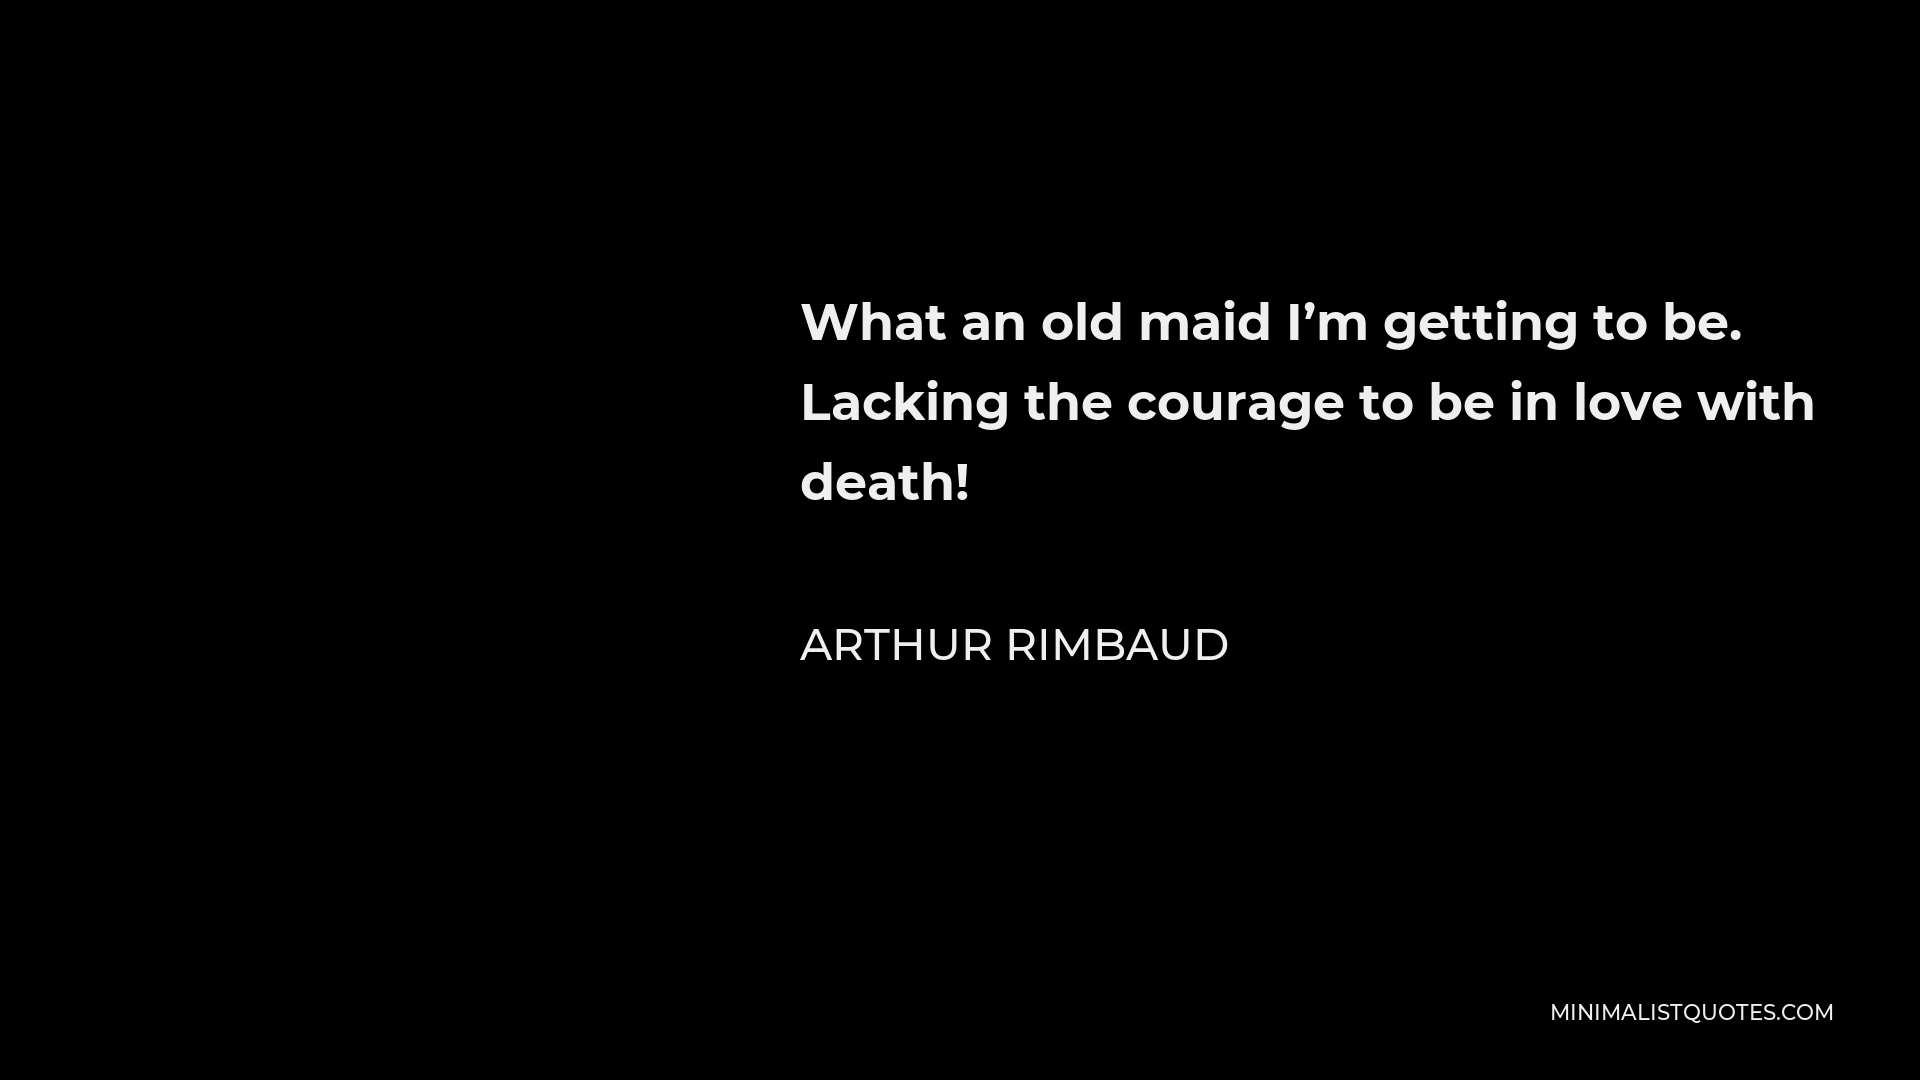 Arthur Rimbaud Quote - What an old maid I’m getting to be. Lacking the courage to be in love with death!